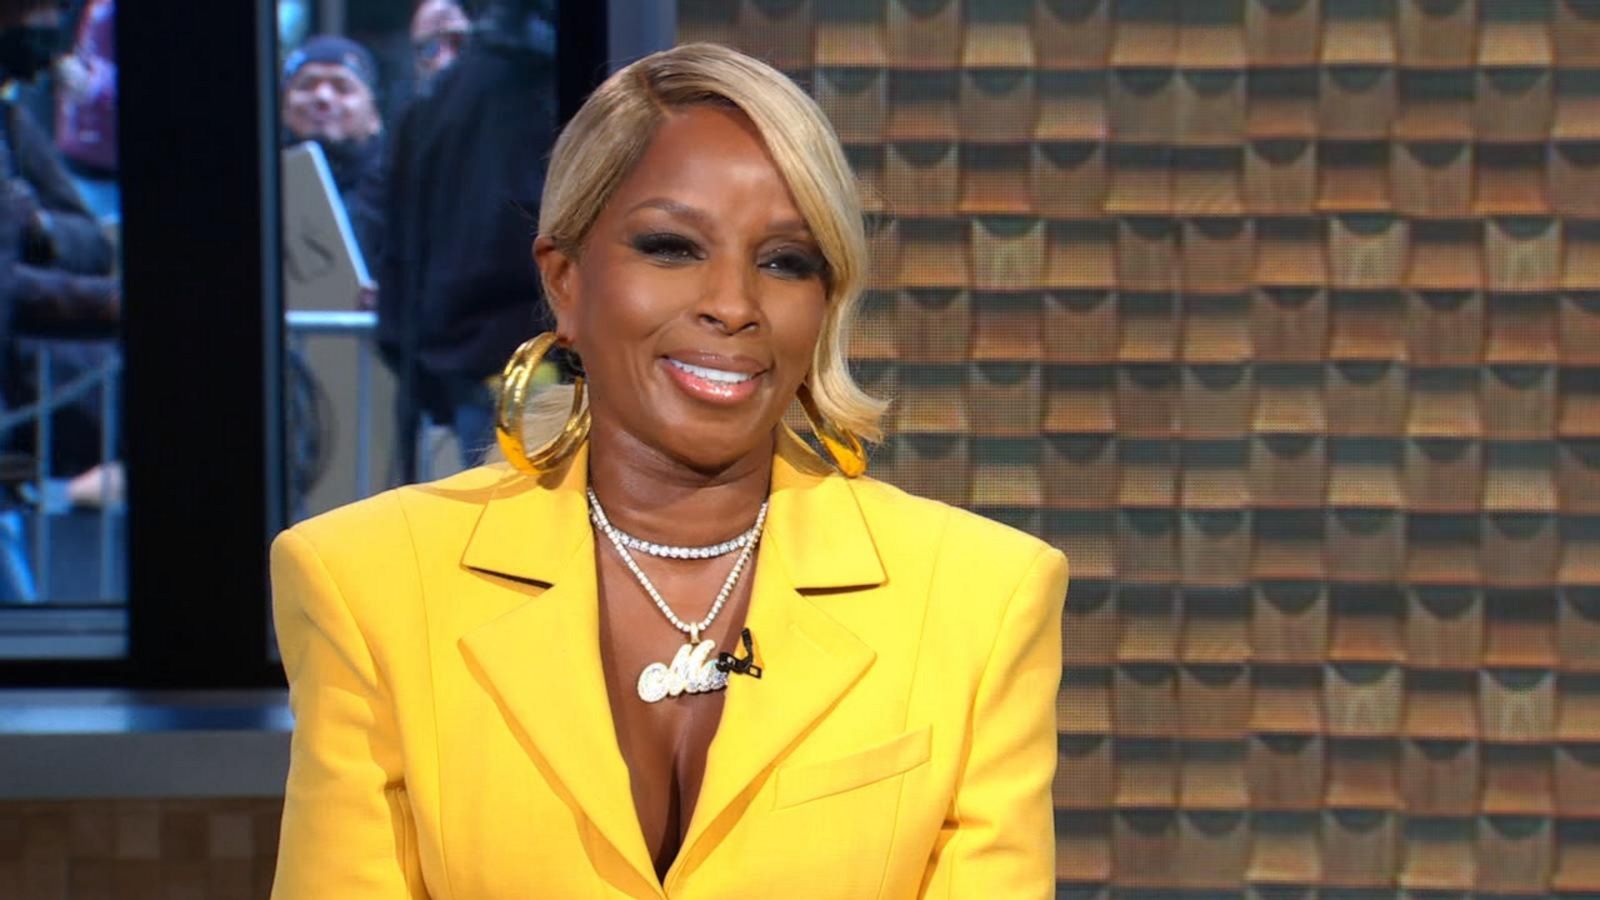 The Story Behind Mary J. Blige's Epic Super Bowl Performance Style